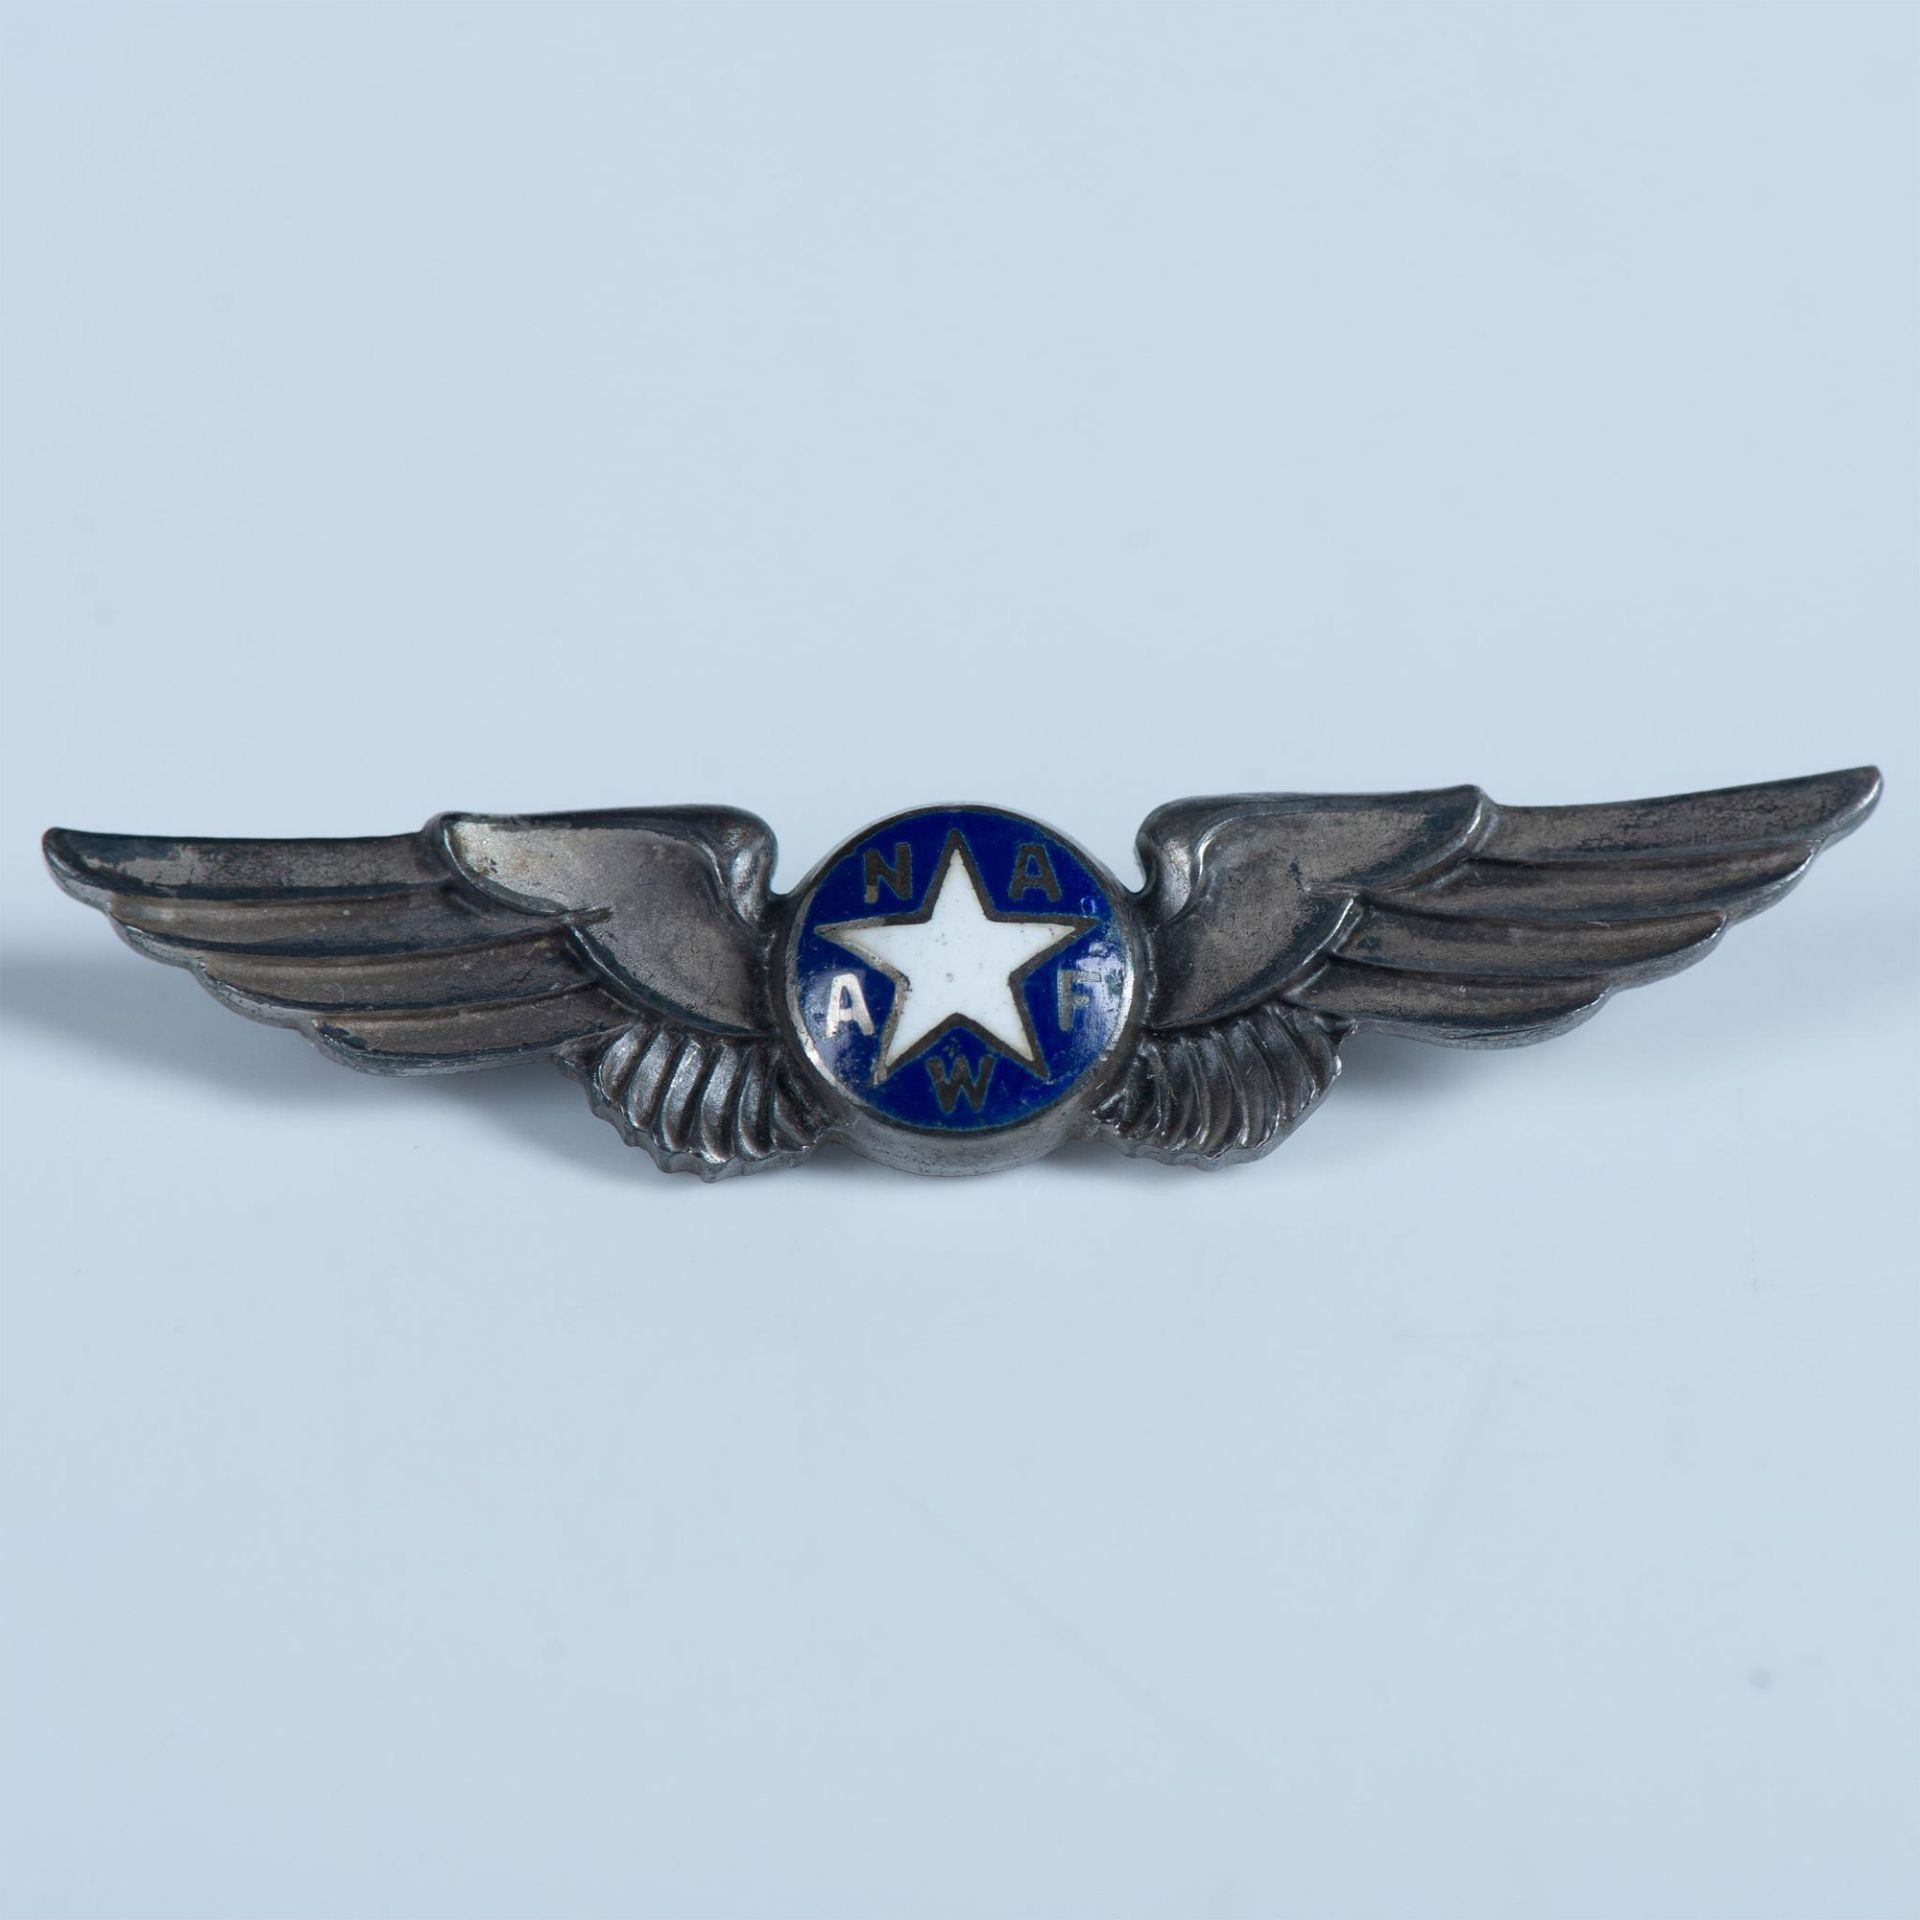 7pc Lapel Pin Collection - Image 3 of 9